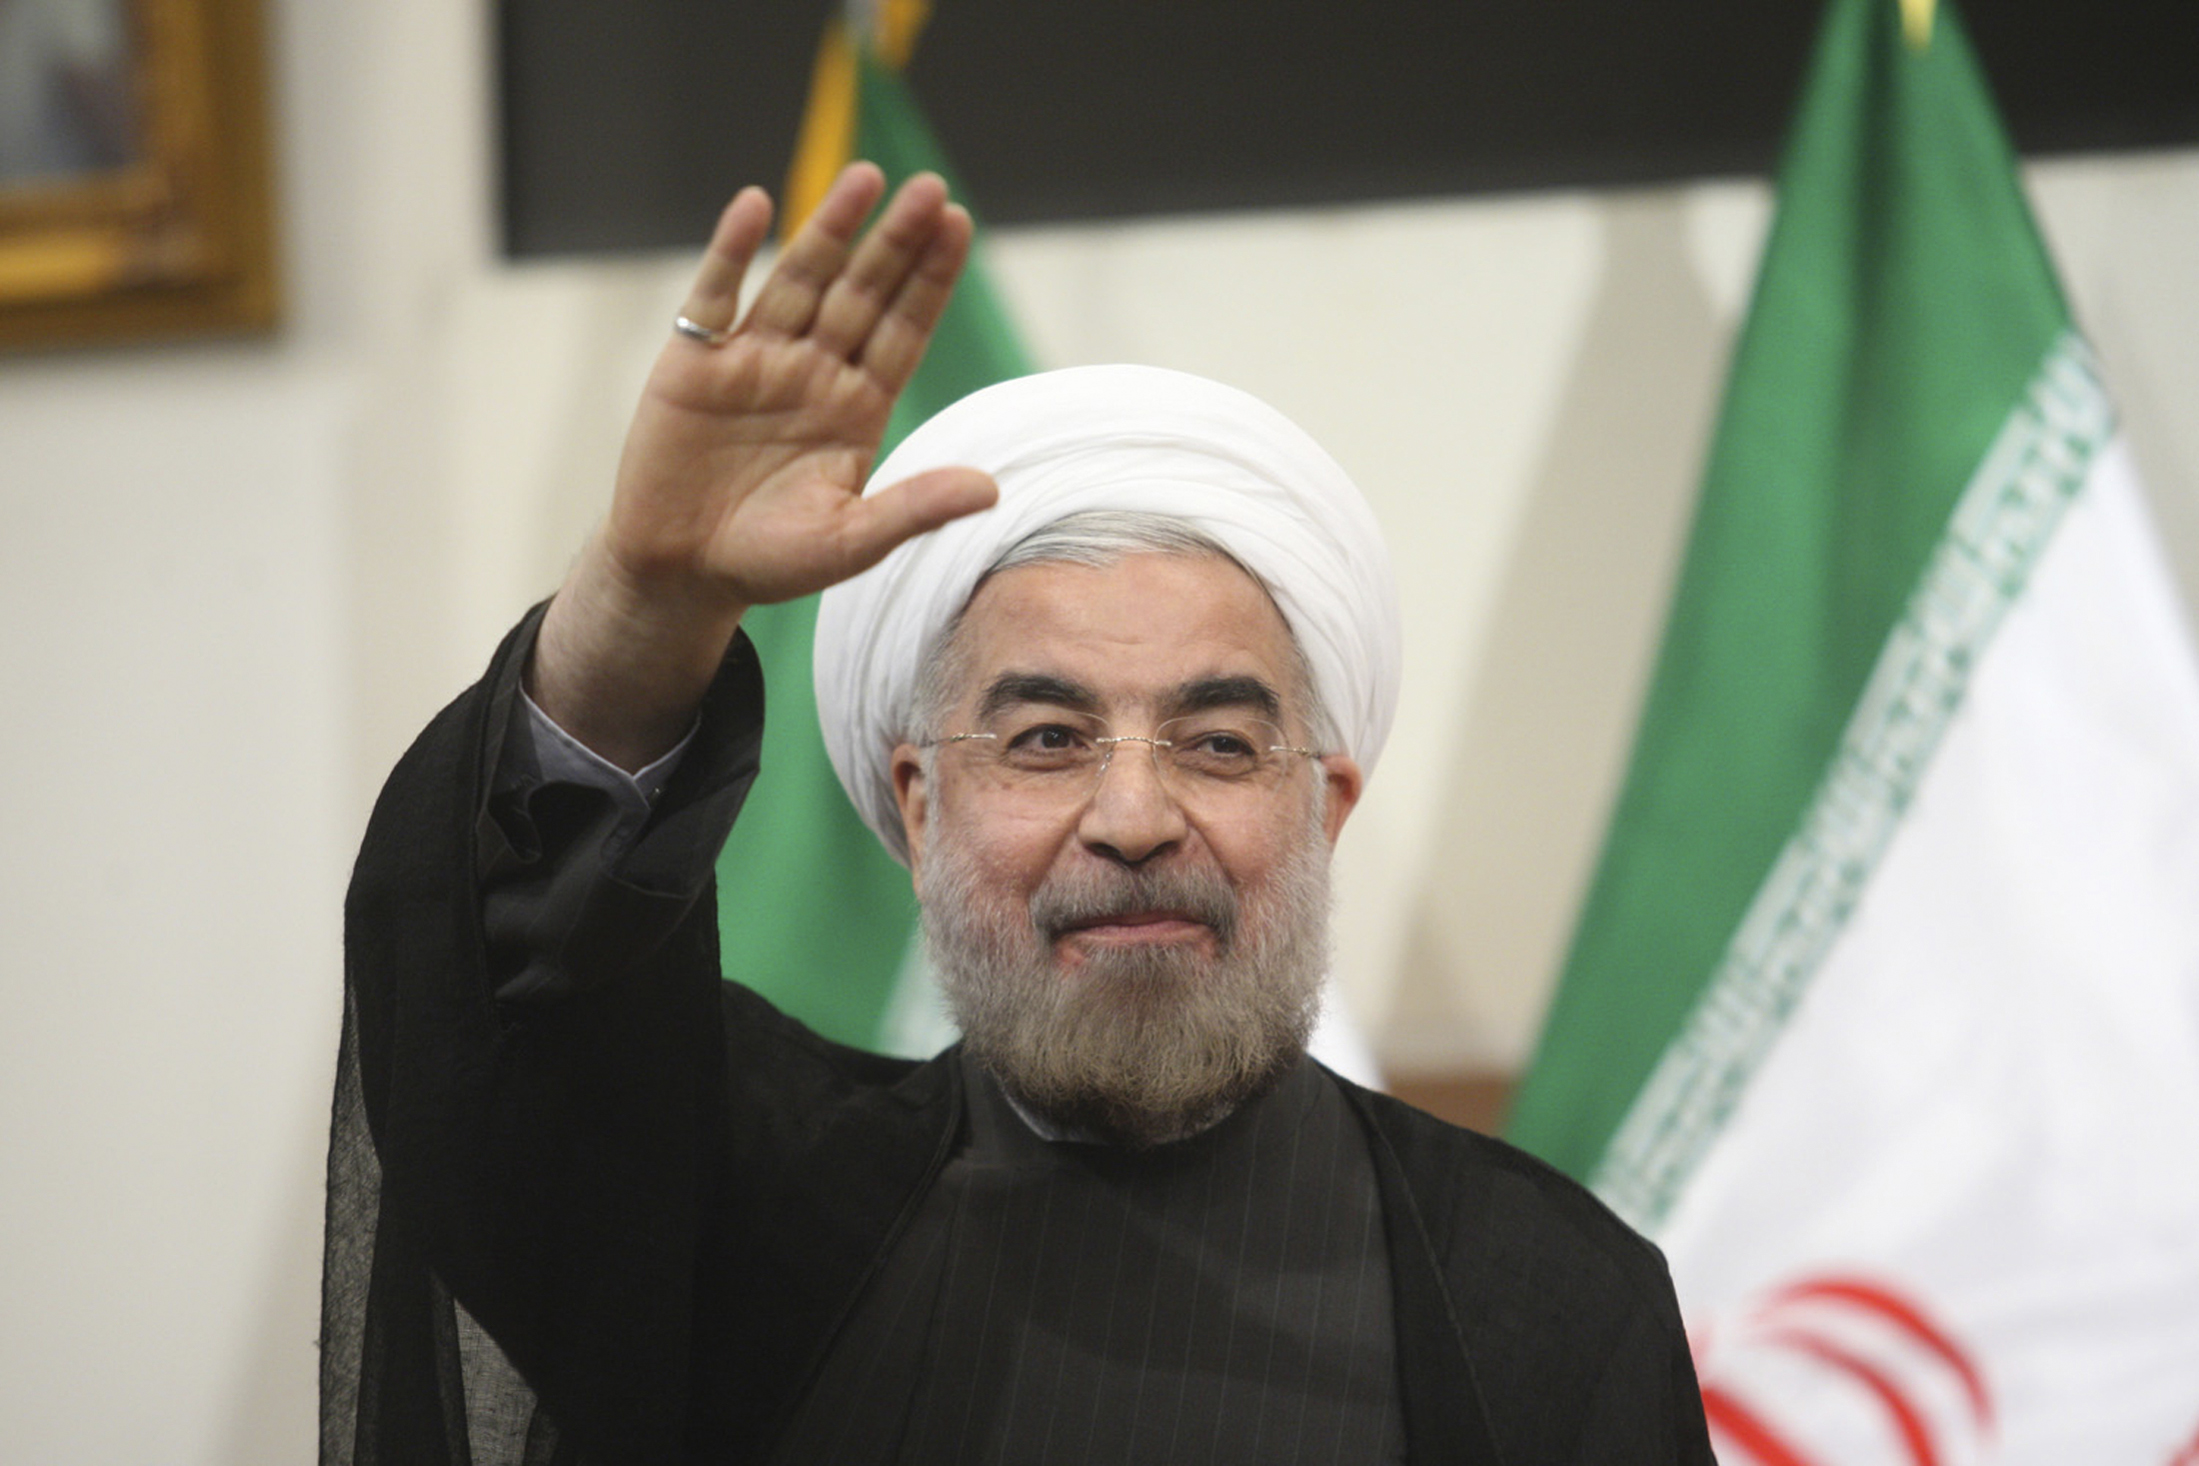 Top Banks in Iran Dragged Into Rouhani Tussle With Rivals